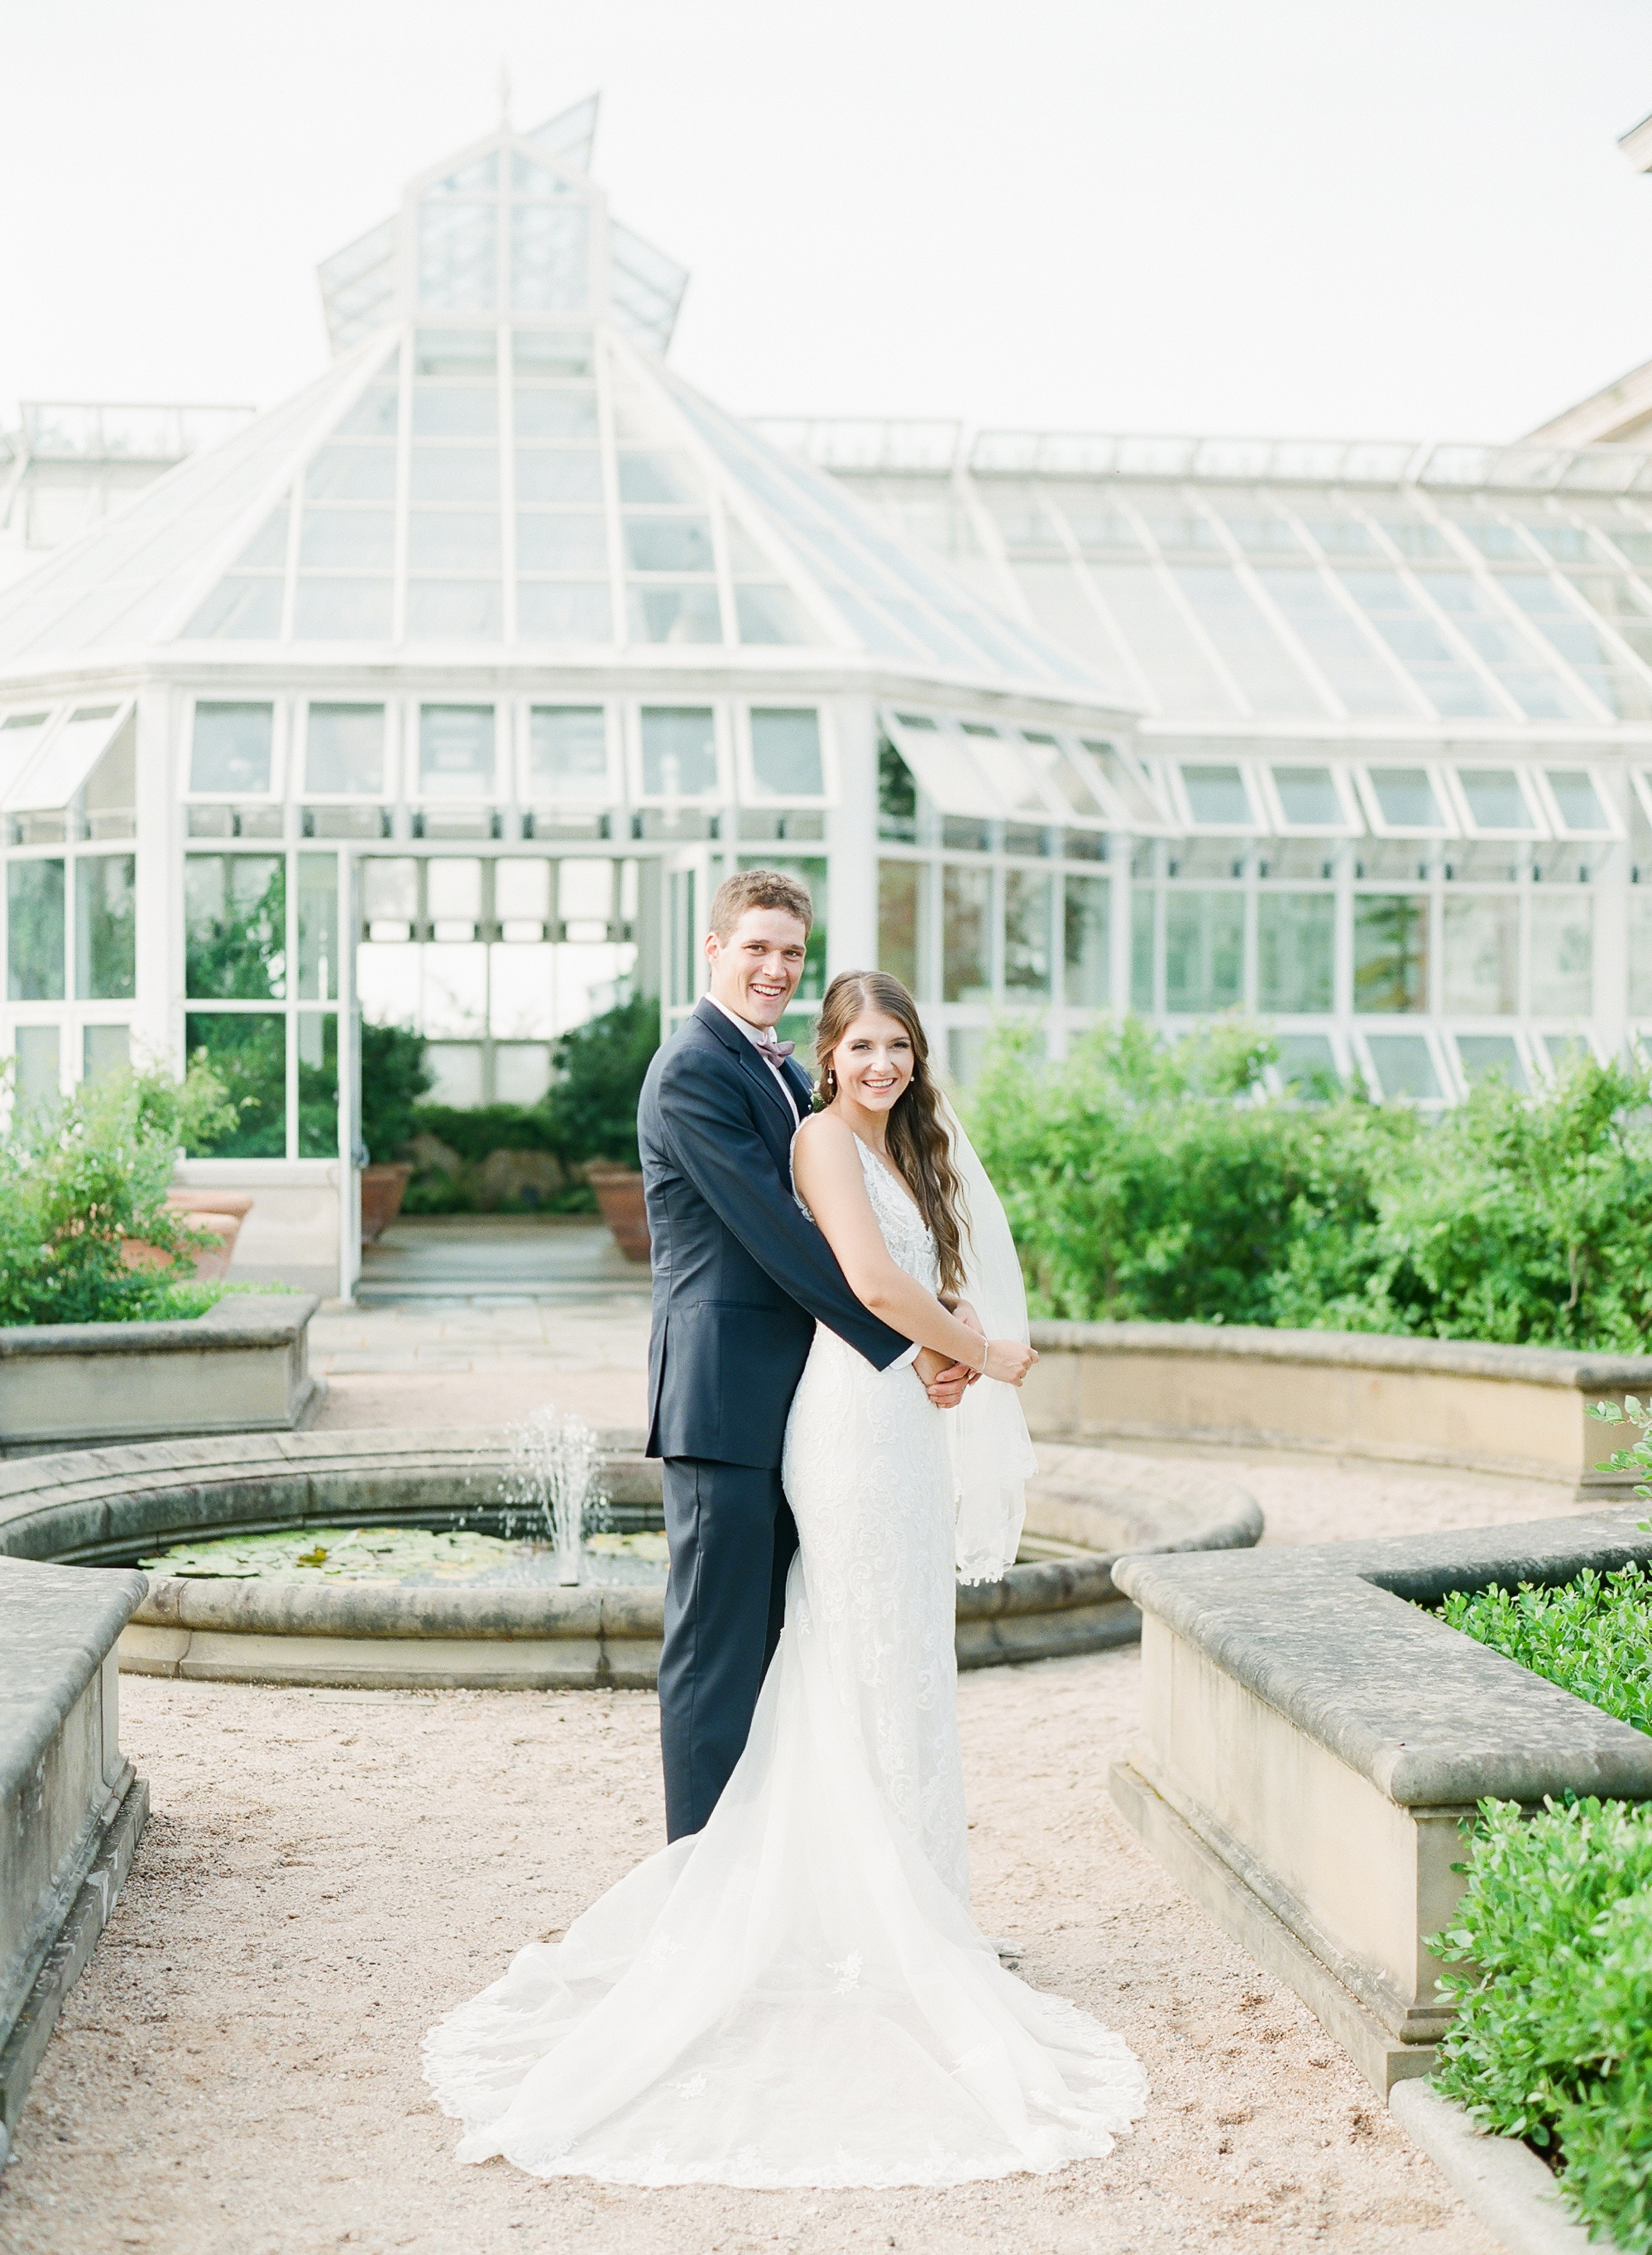 Halifax Wedding Photographer Jacqueline Anne Photography captures Newcombe Farmers Wedding in the Harriet Irving Gardens